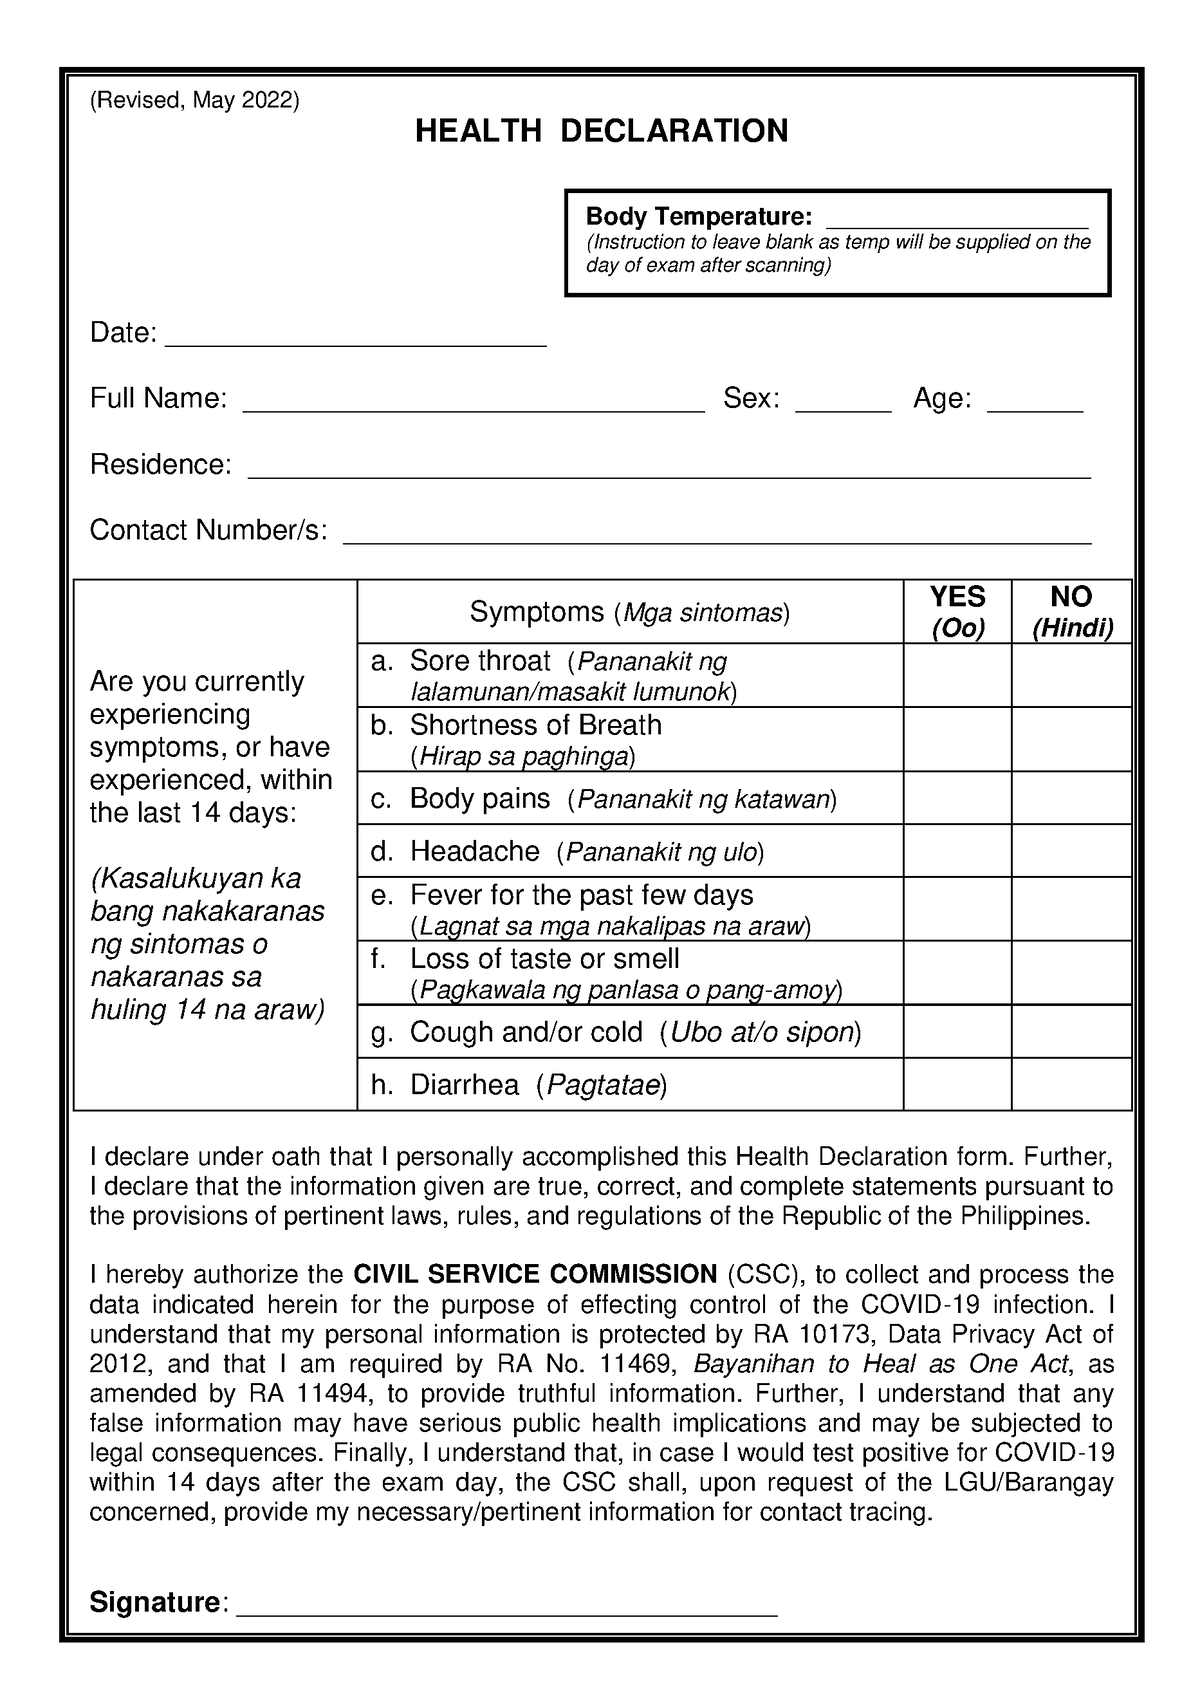 Health Declaration Form 2022 05 Revised A5 A 07 22 Revised May 2022 Health Declaration 